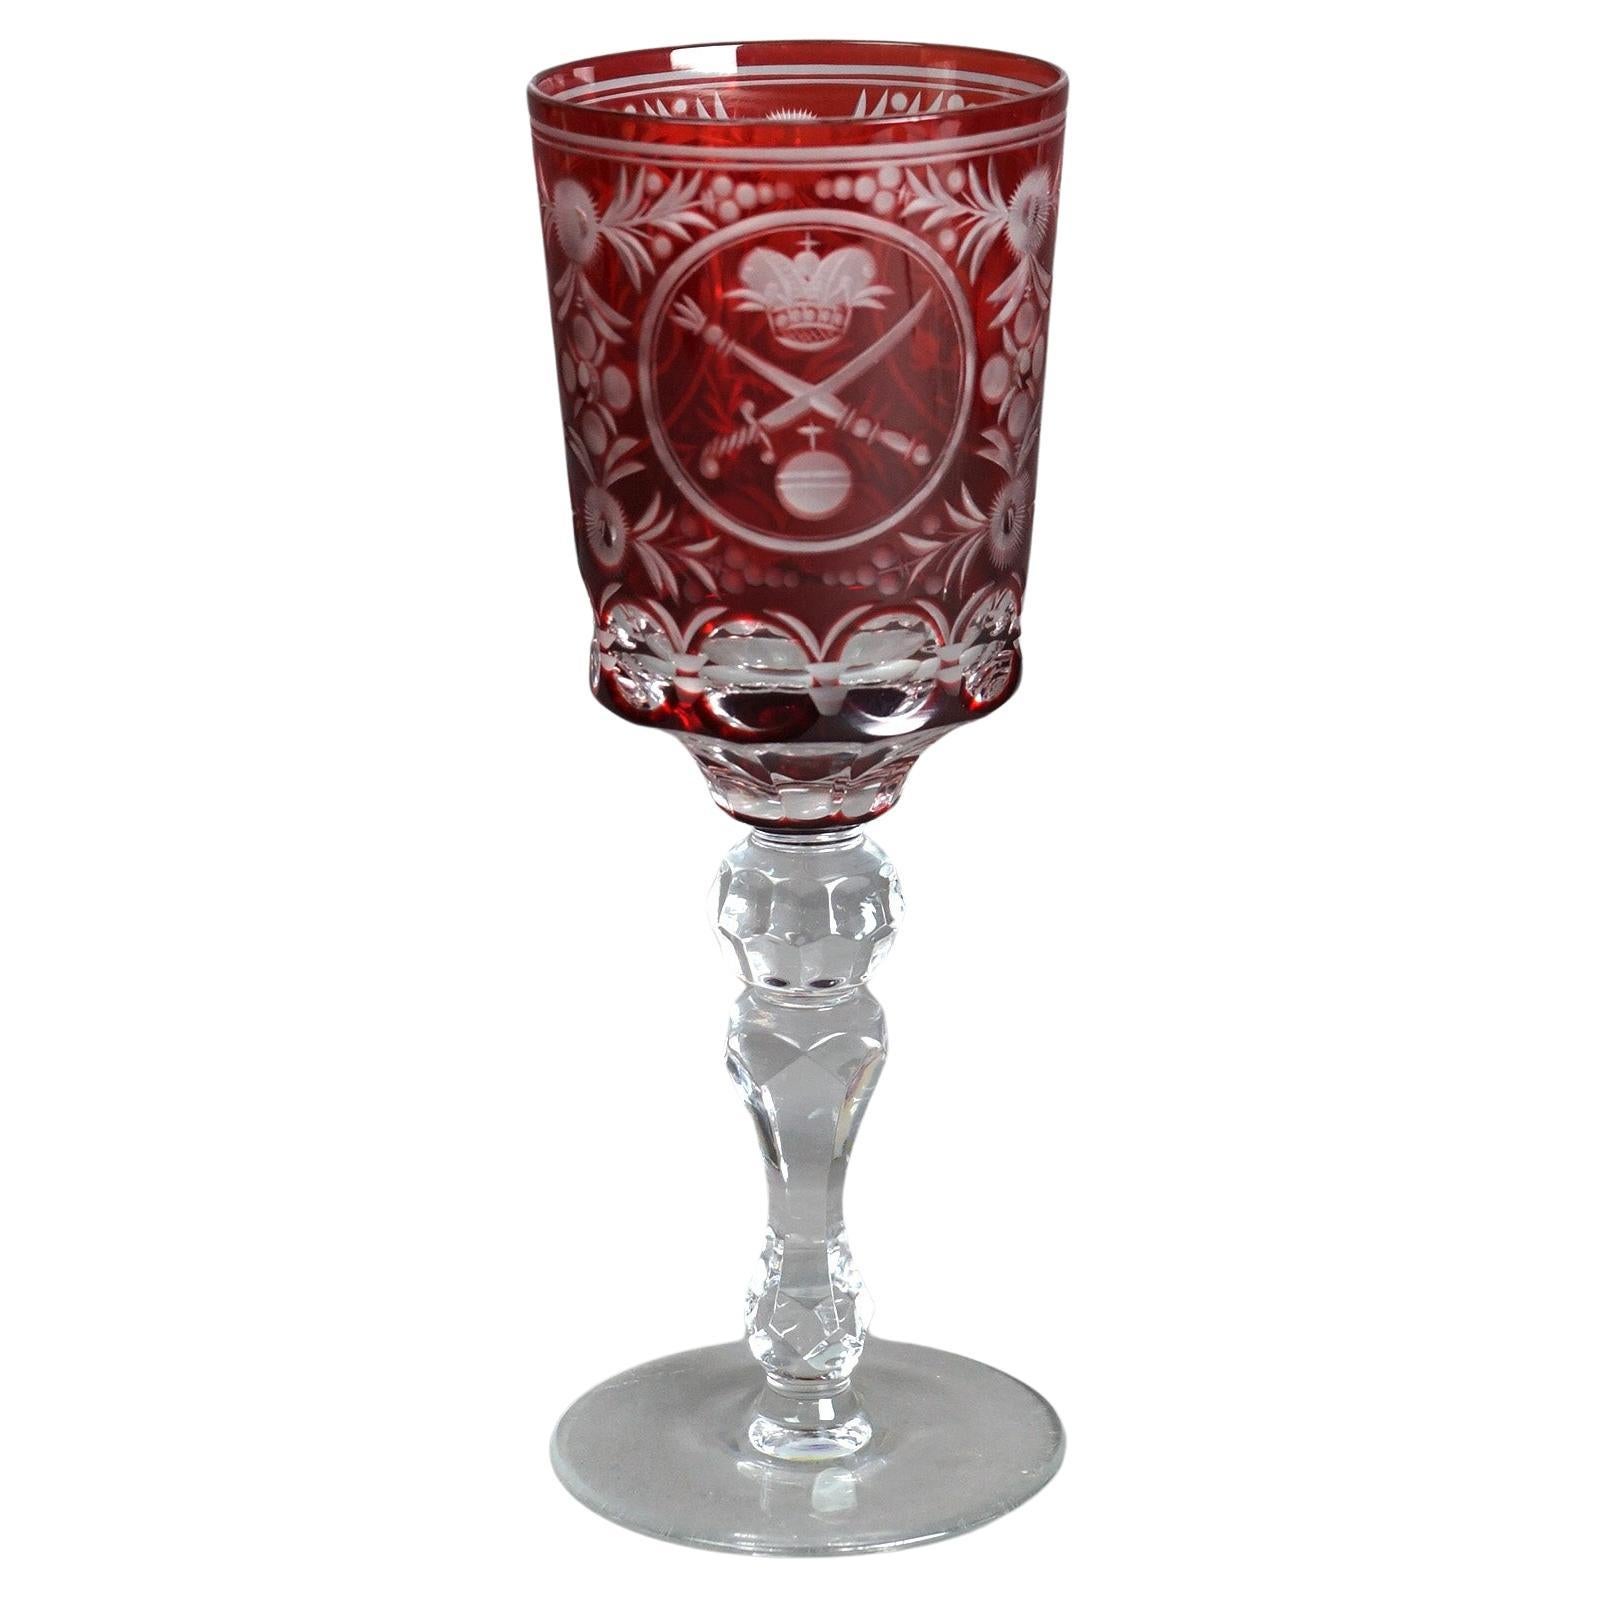 Antique Russian Imperial Czar Nicholas II Cranberry Cut to Clear Crystal Challis with Double Headed Eagle, Crossed Swords and Foliate Elements, C1910

Measures - 9.25